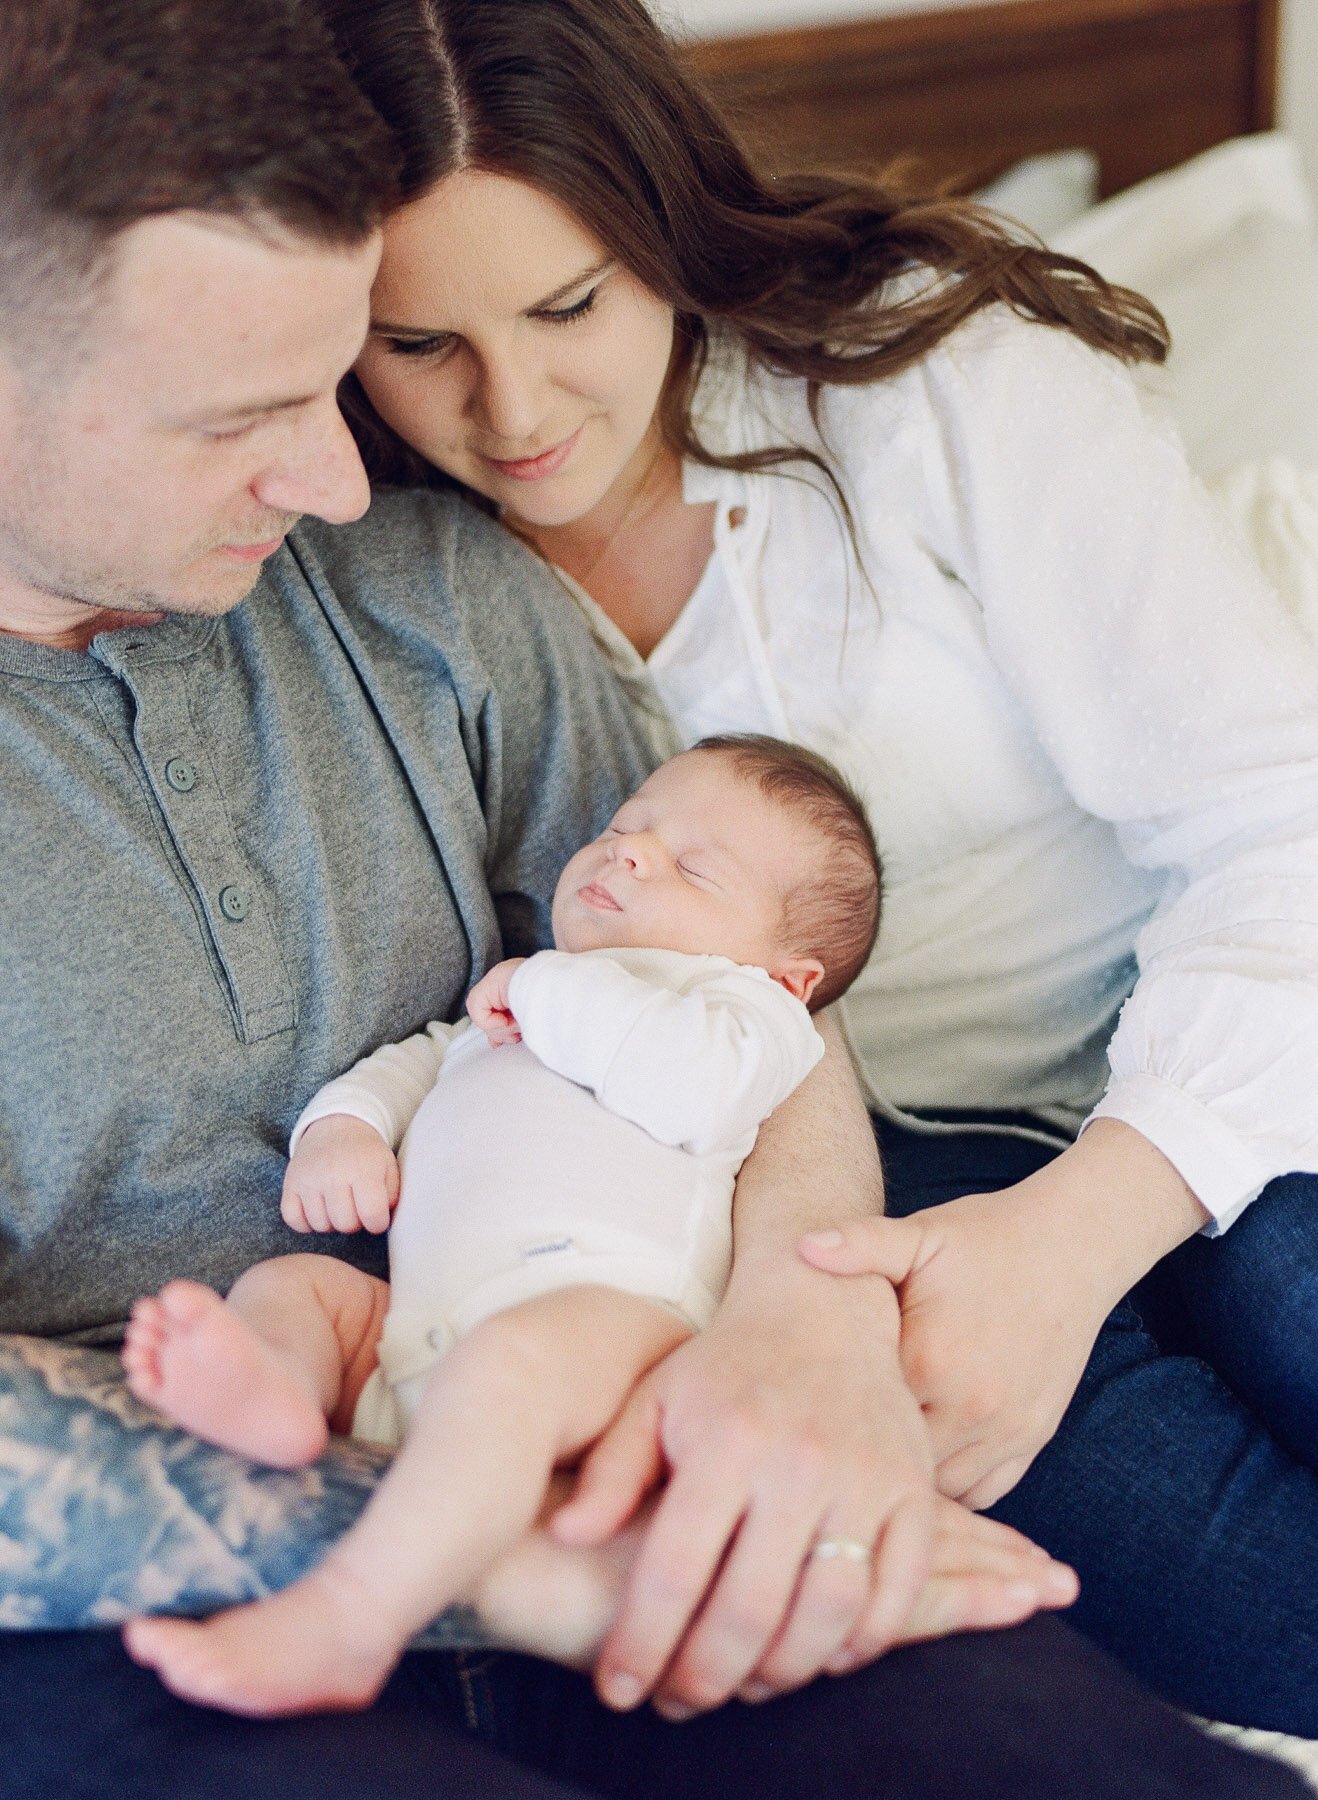 Saratoga Springs NY family and newborn photography by Michelle Lange Photography-17.jpg